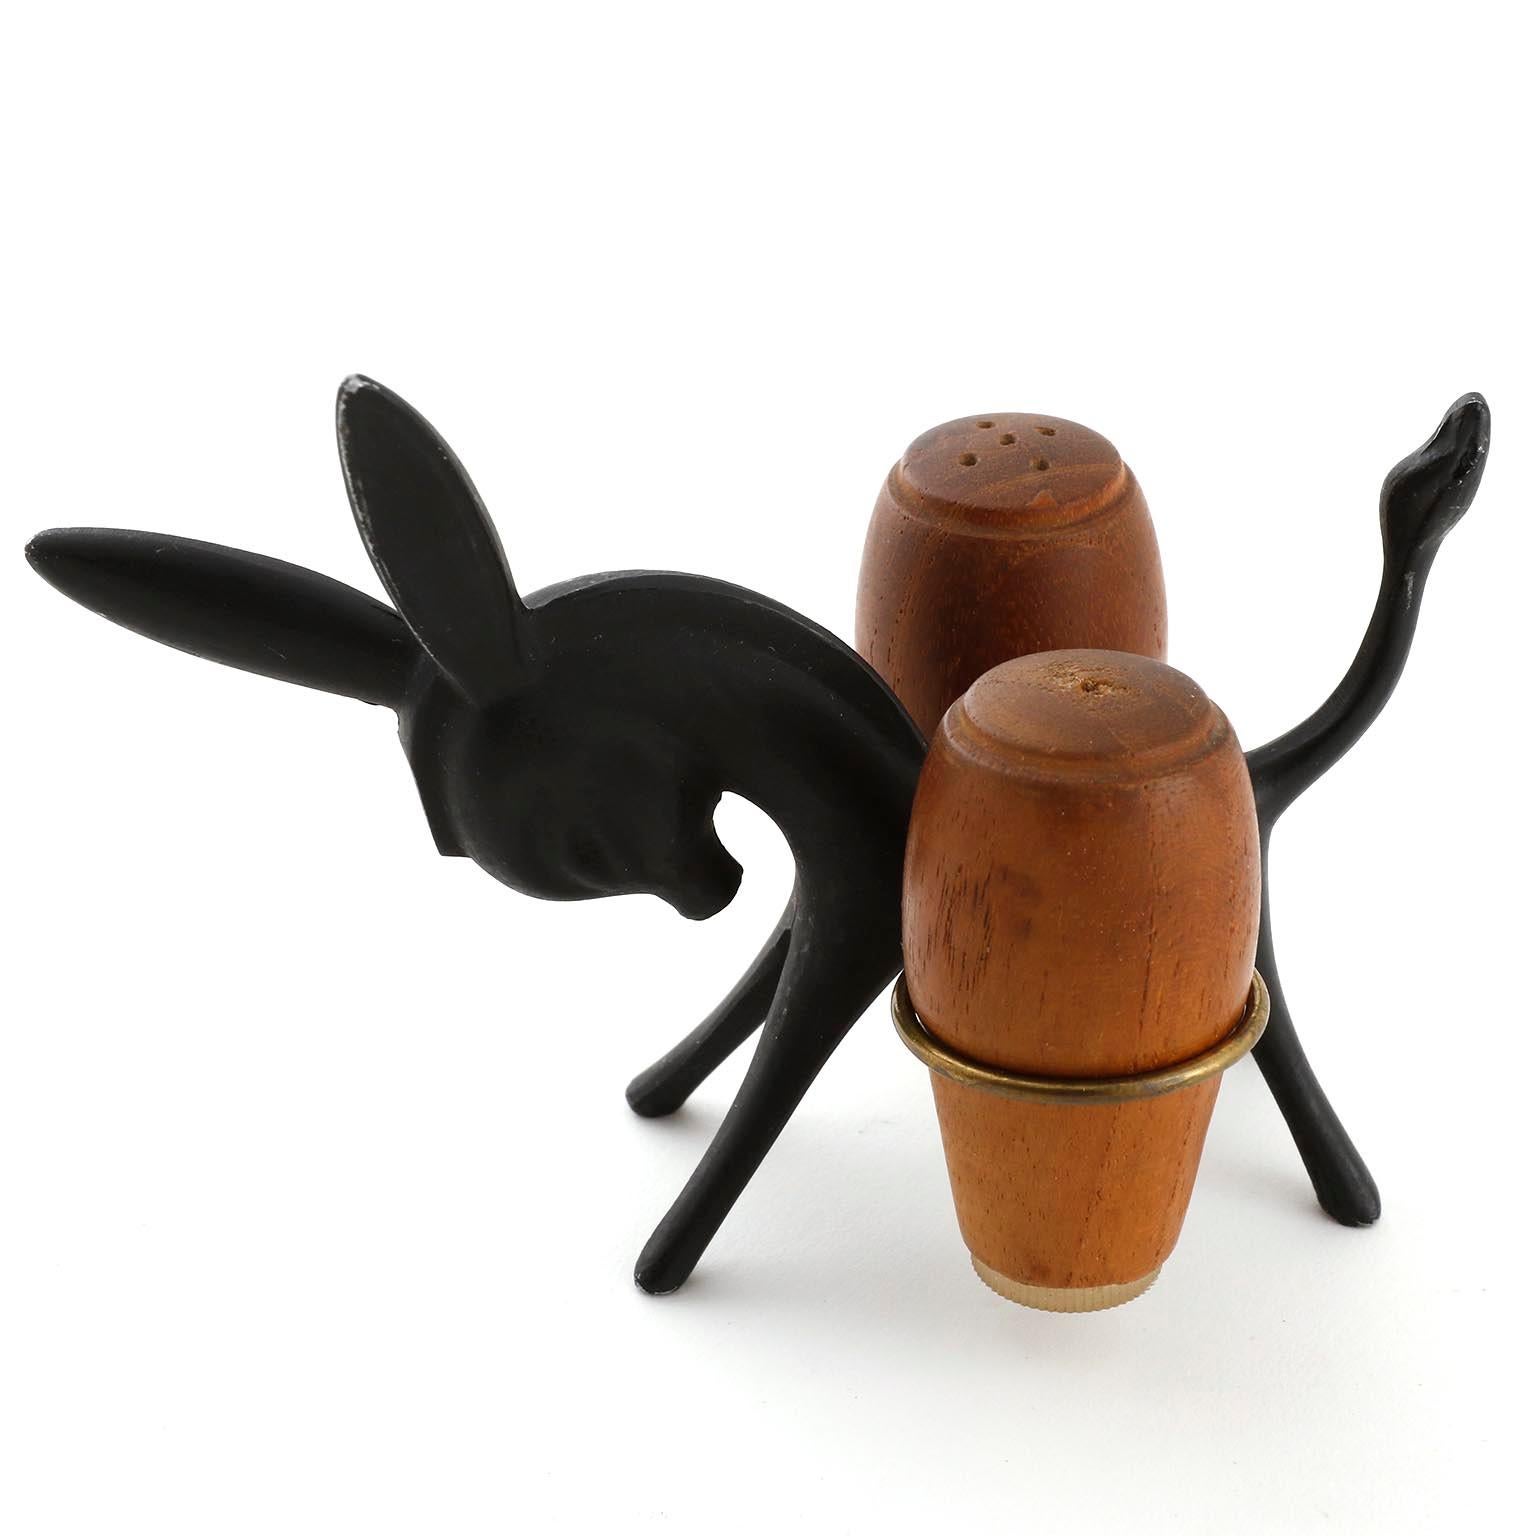 A salt and pepper shaker donkey set designed by Walter Bosse and manufactured by Hertha Baller, Austria, Vienna, in midcentury in 1950s.
The donkey is made of blackened brass. The shakers are made of teak wood.
This charming piece is an eyecatcher